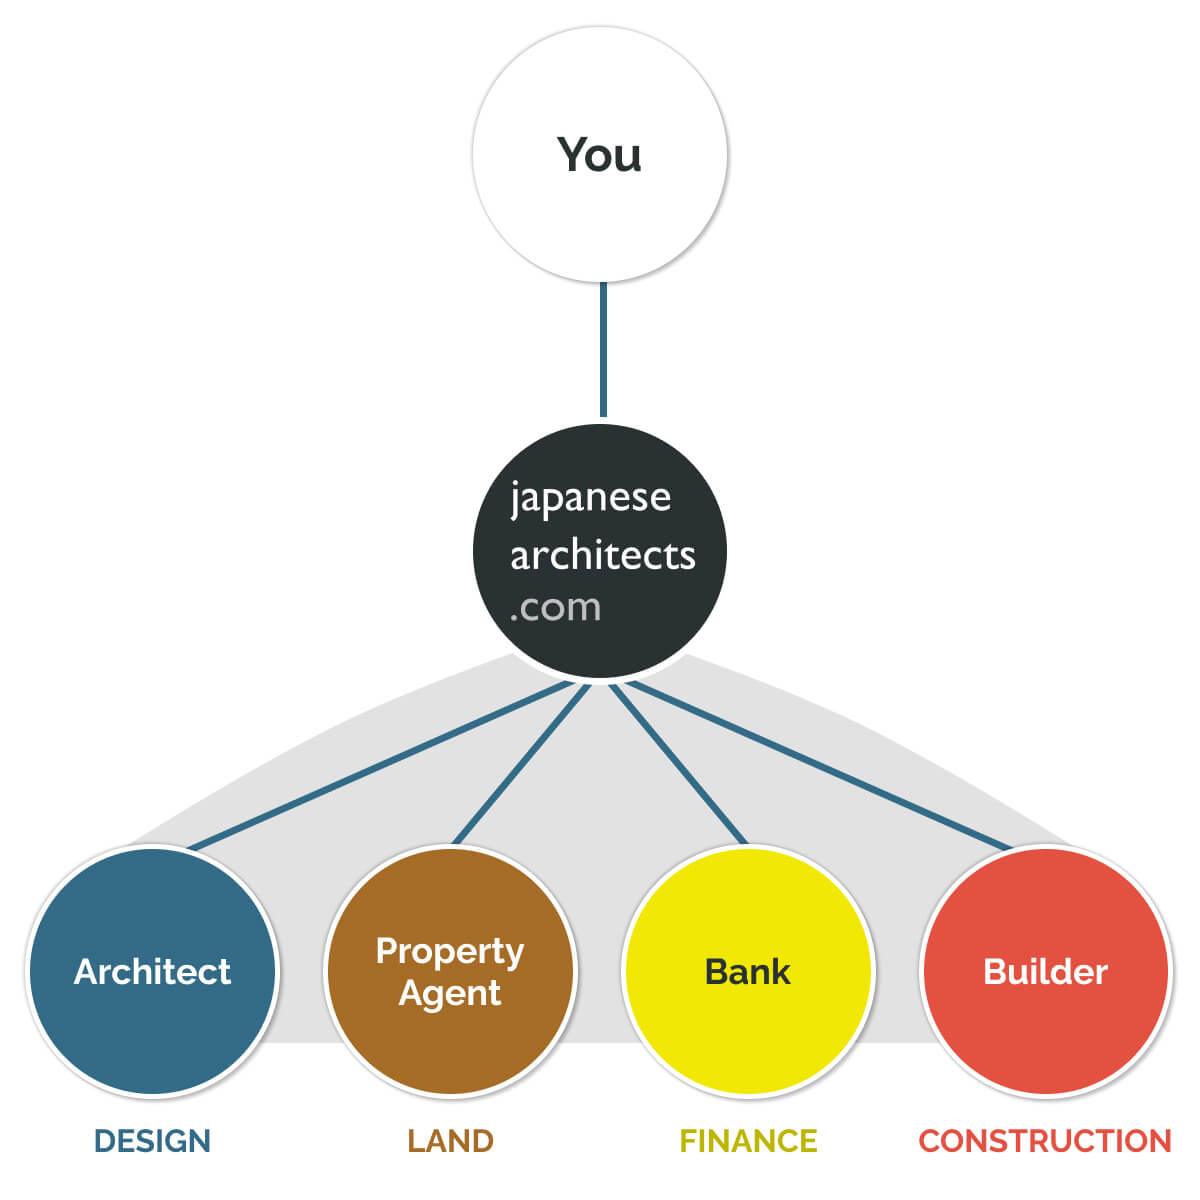 japanese-architects.com offers you comprehensive service